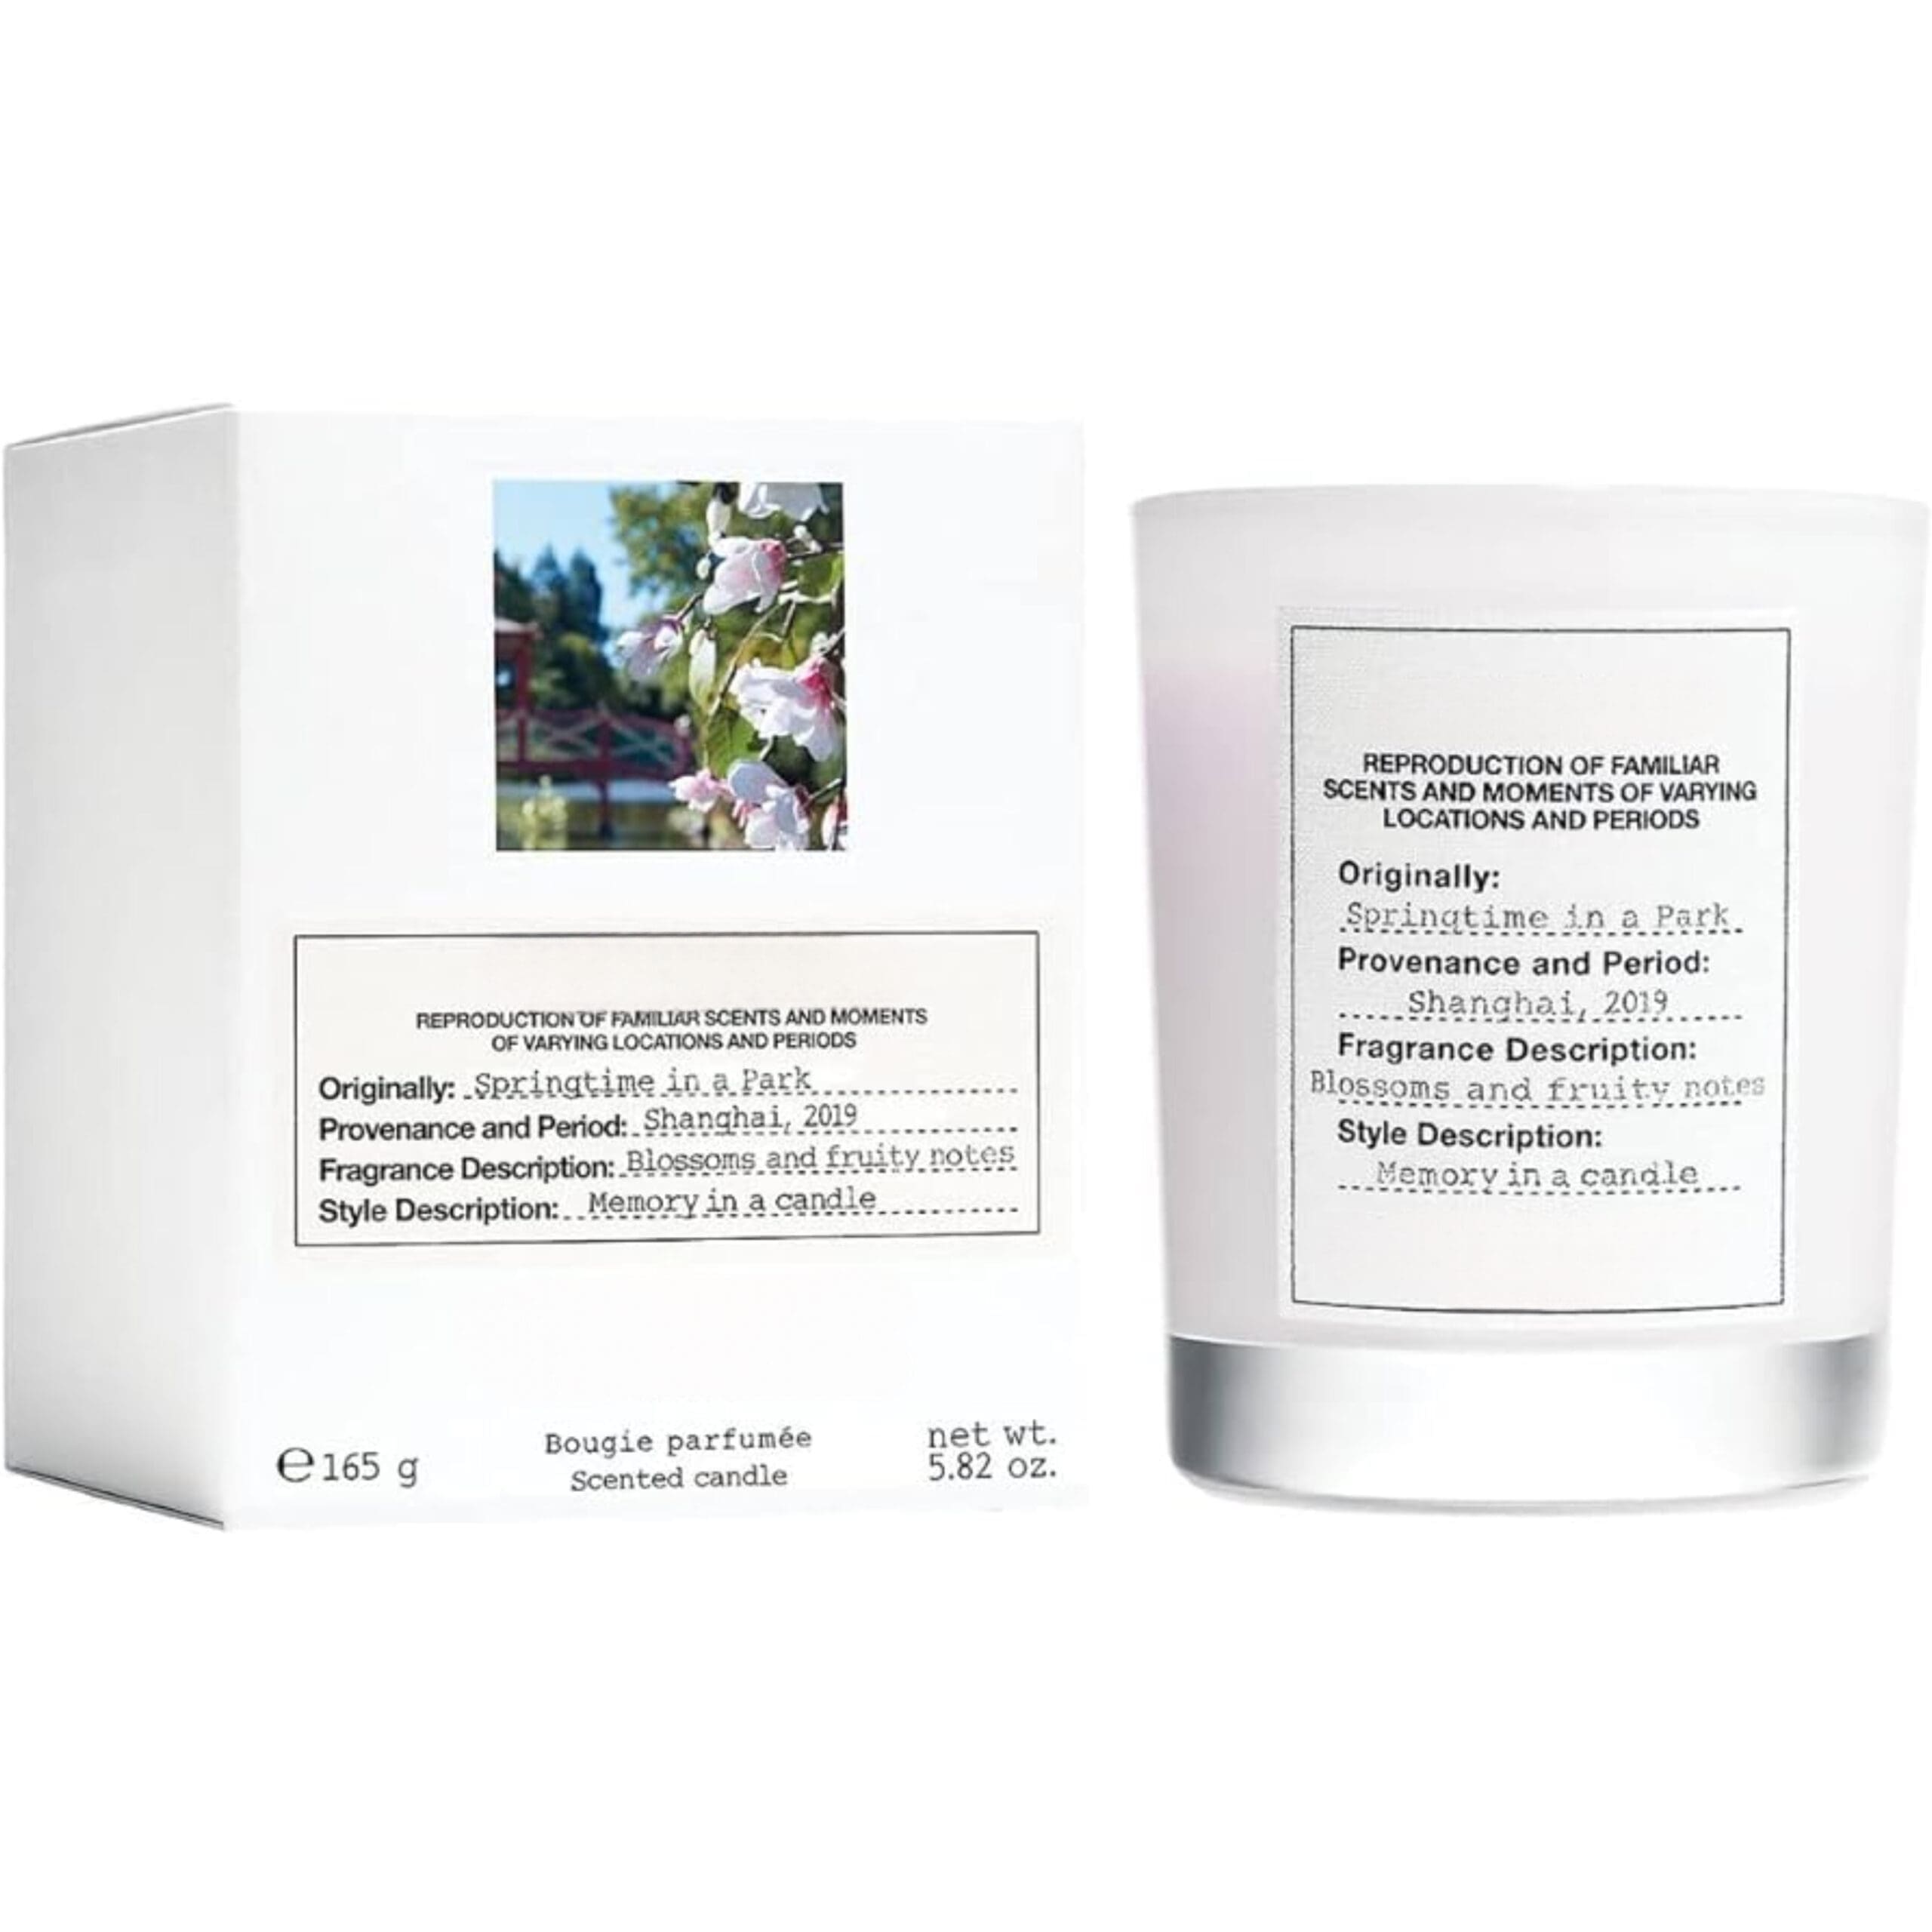 3511 Springtime In A Park Scented candle 165 g